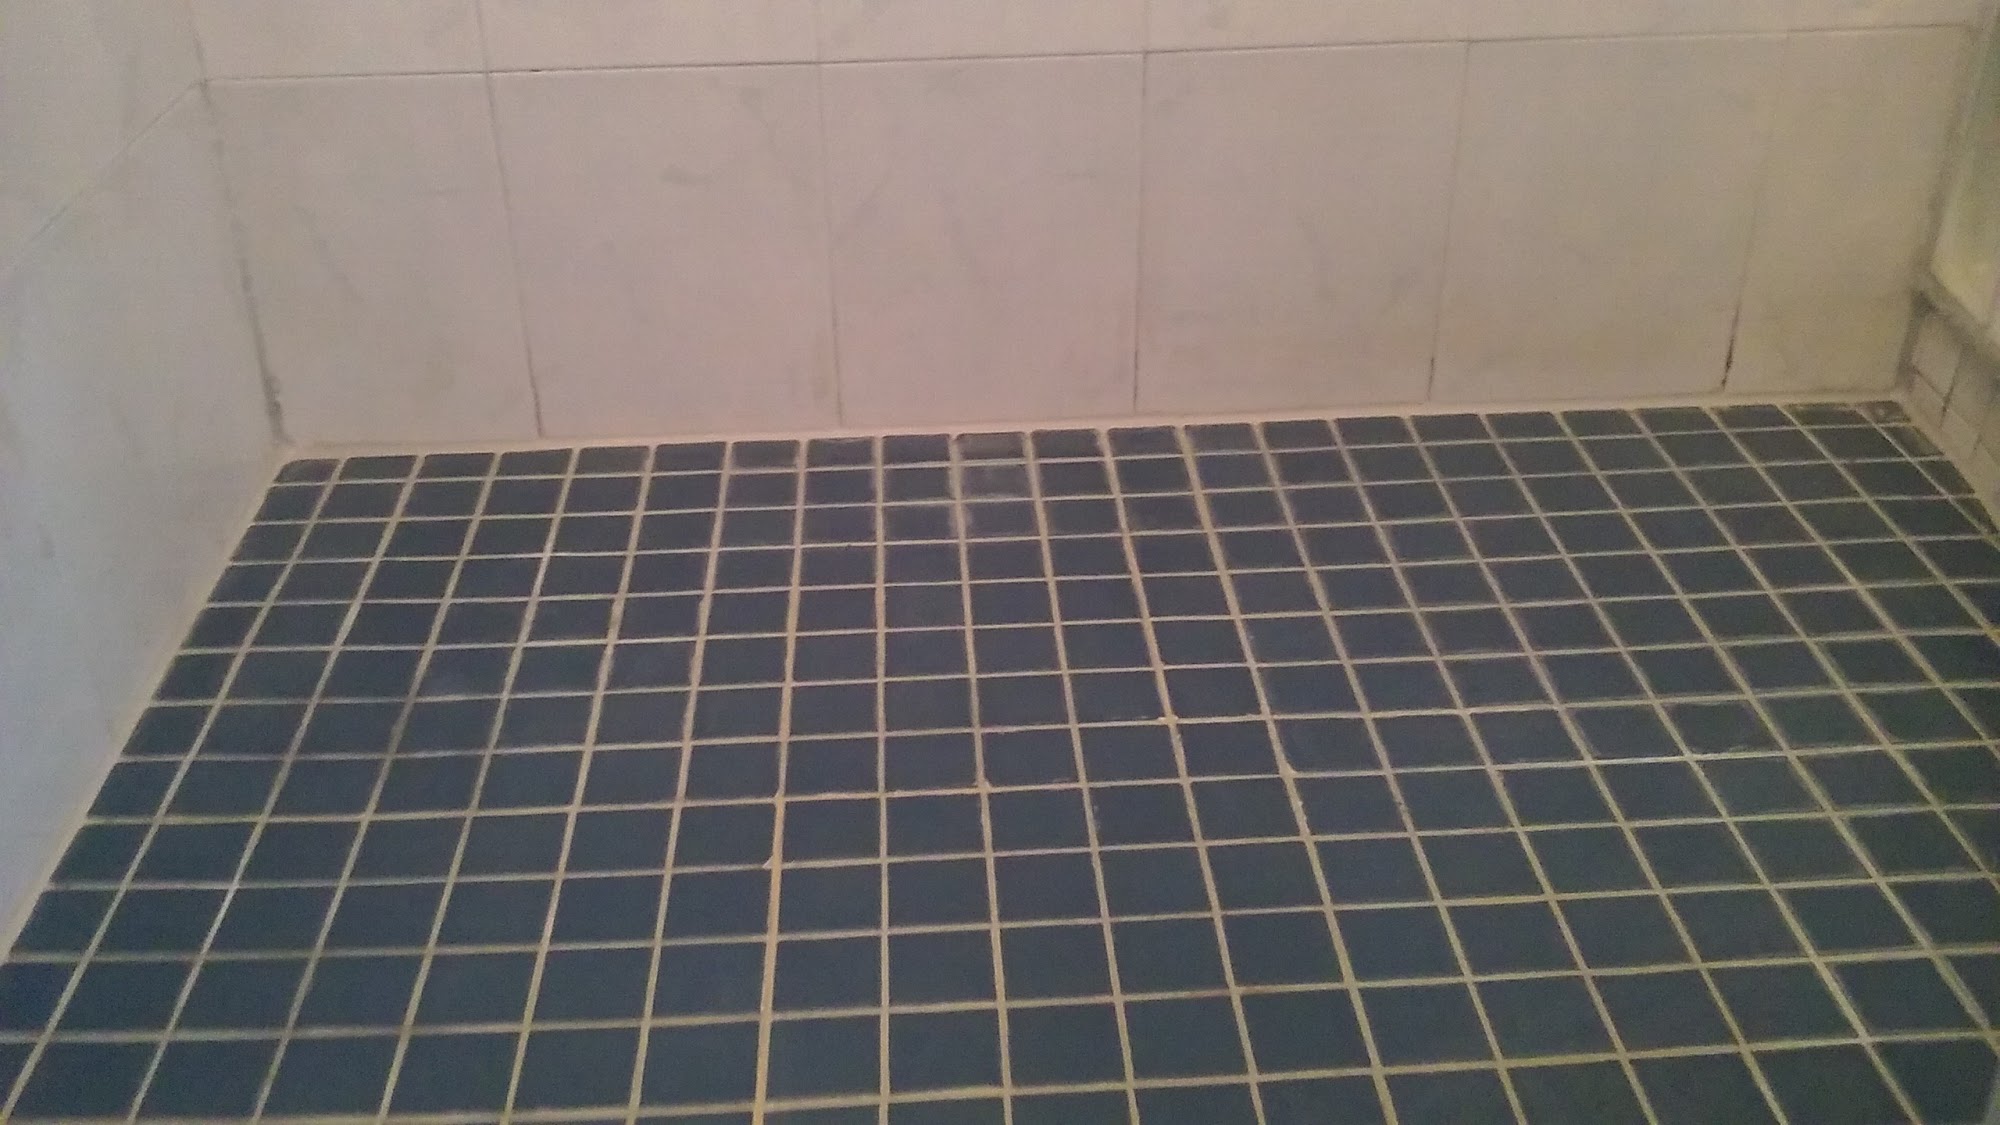 The Grout Savior 35 Washington Ave, Dumont New Jersey 07628